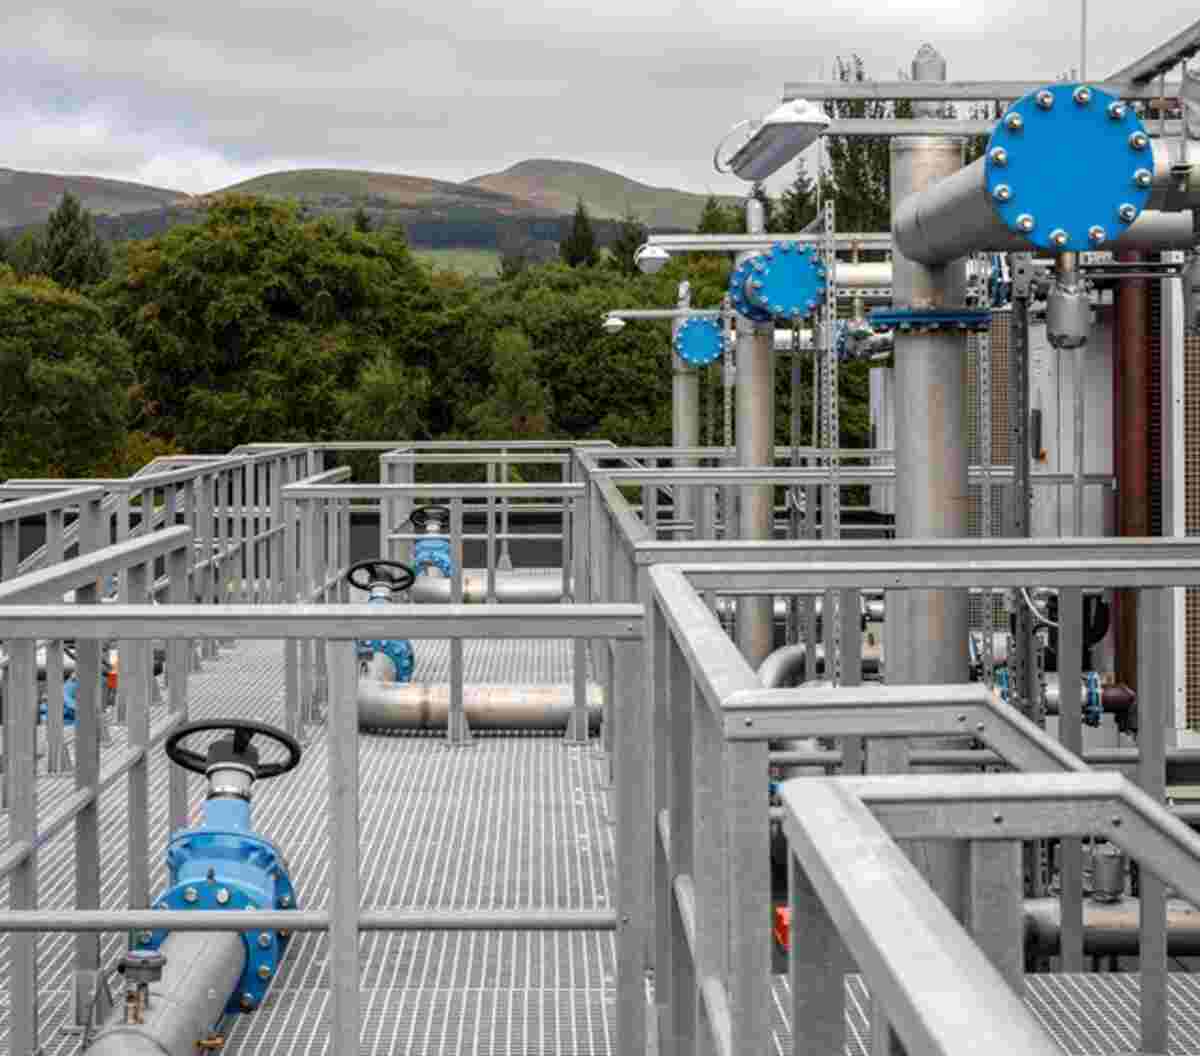 Supercomputing facility chilled Water distribution pipework connected to roof mounted cooling towers - credit Keith Hunter